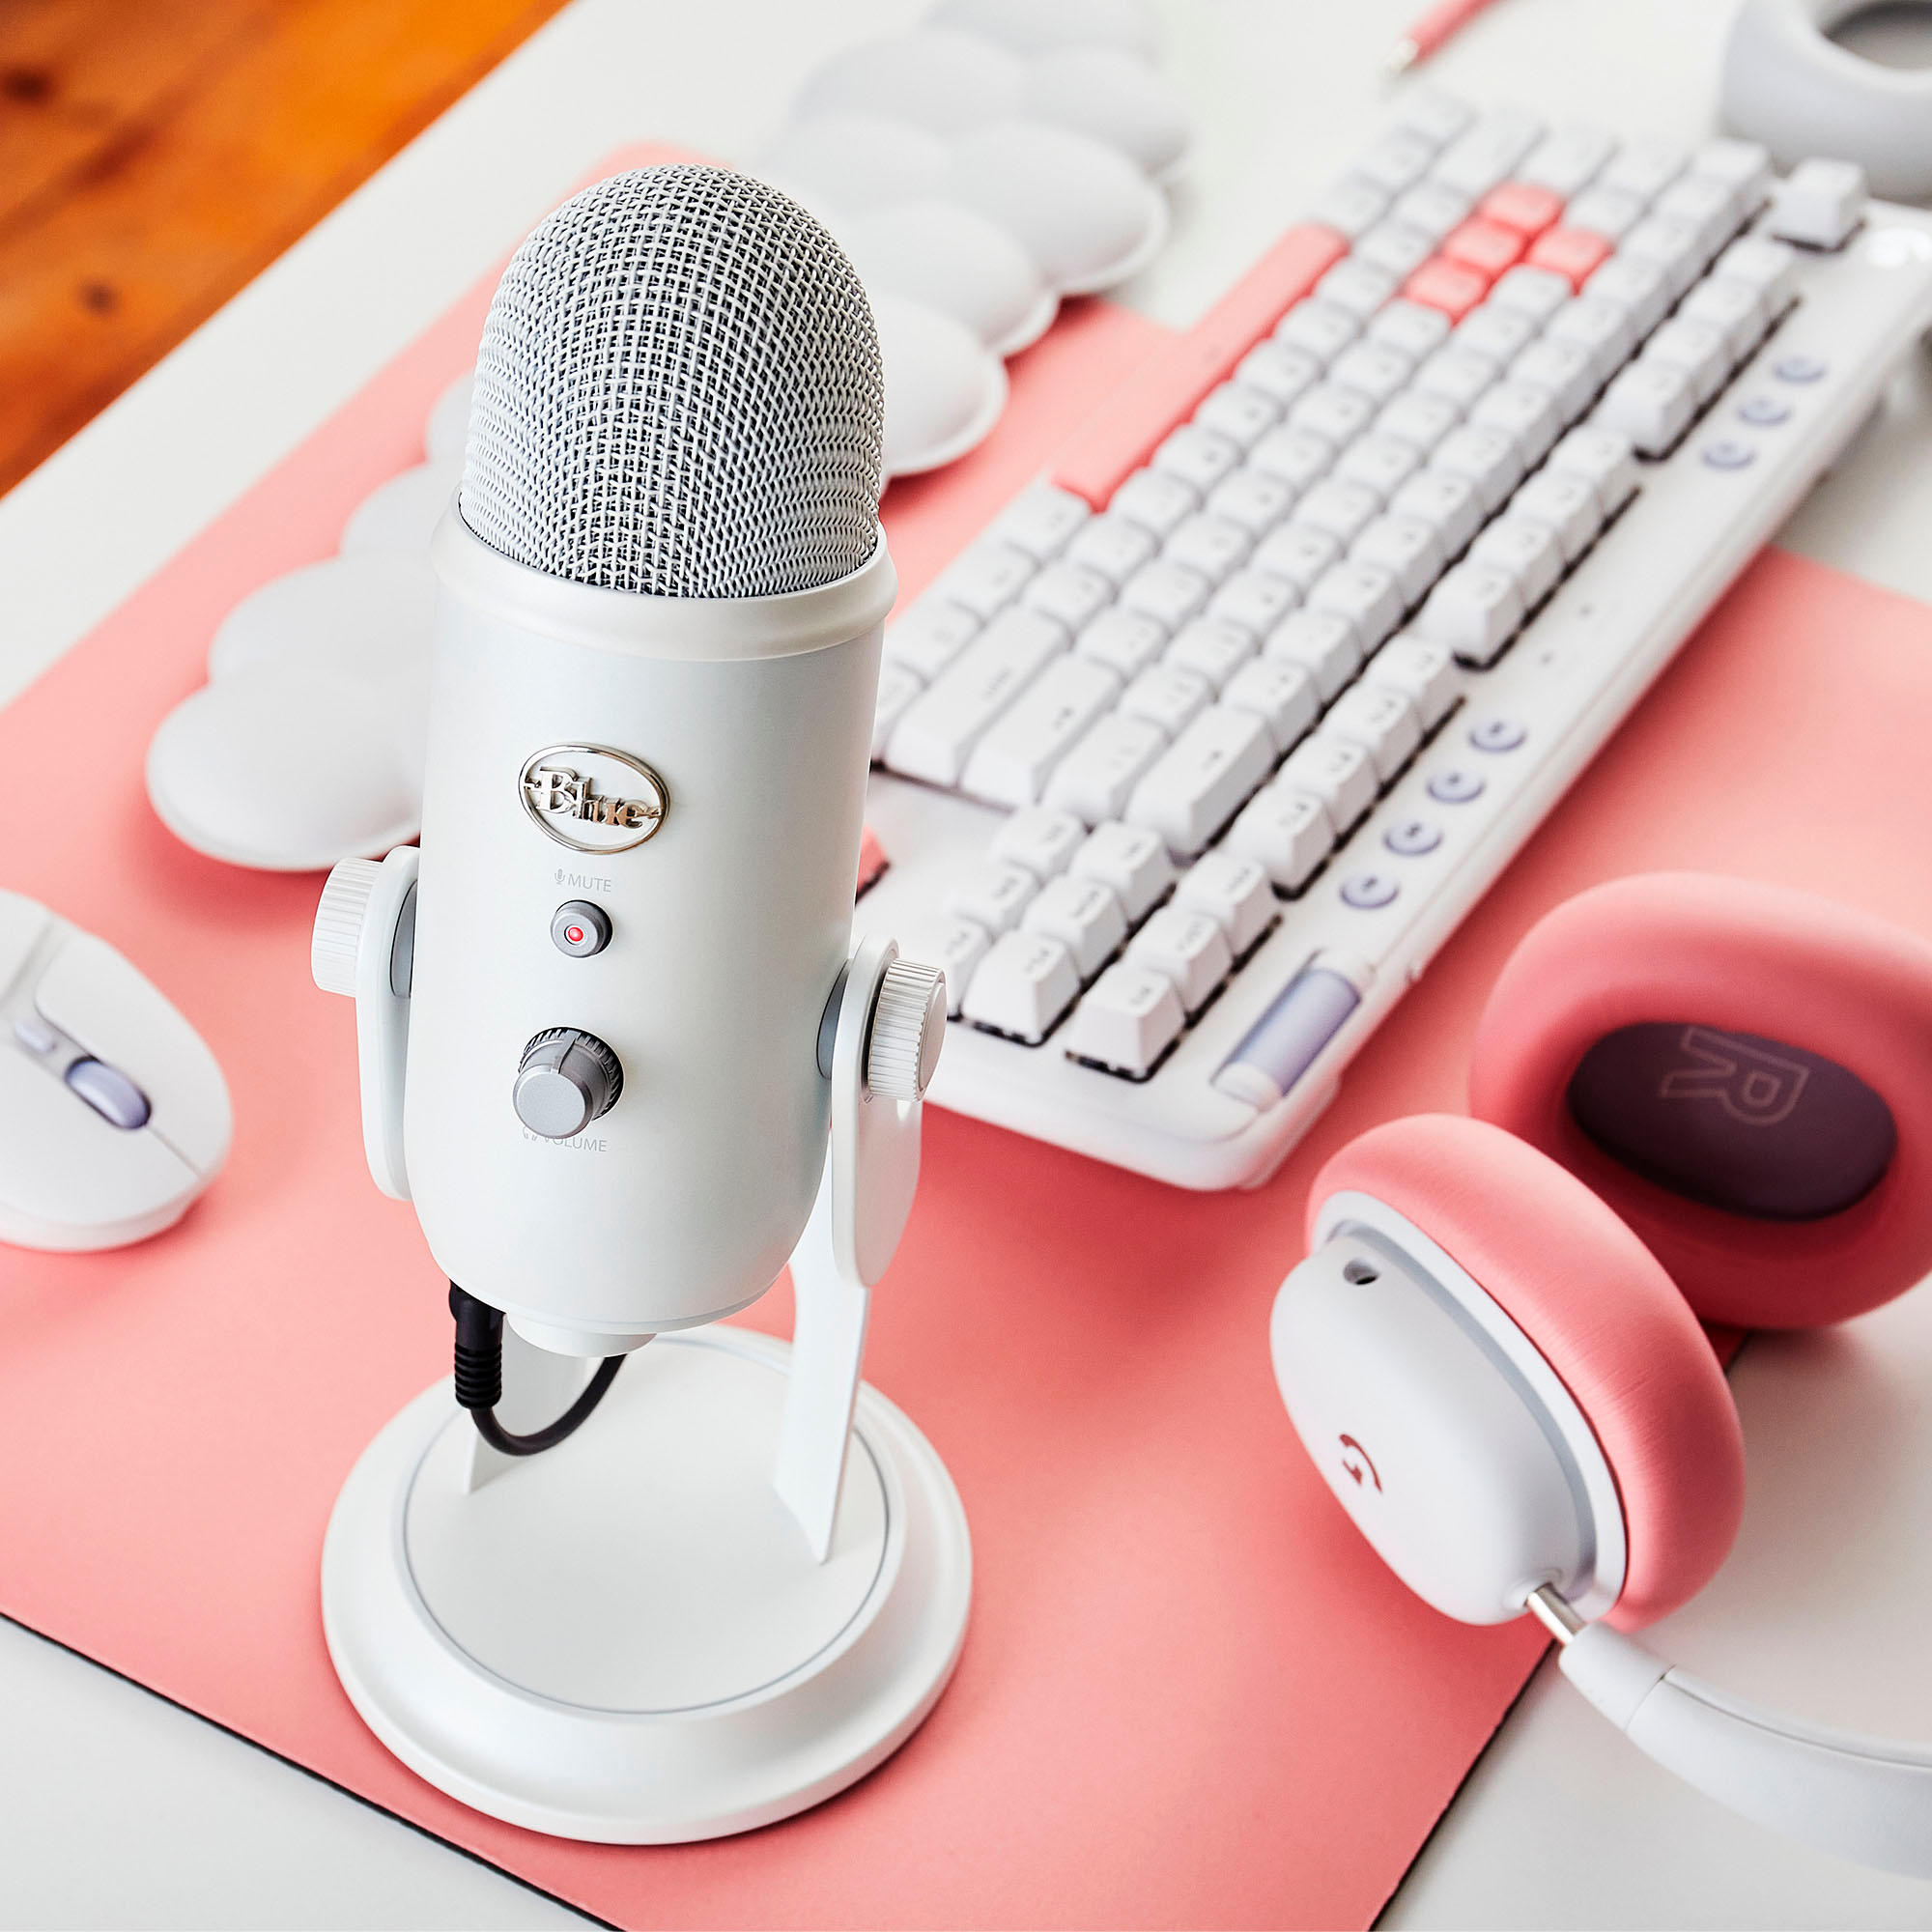 Blue Yeti USB Streaming Microphone - Whiteout 